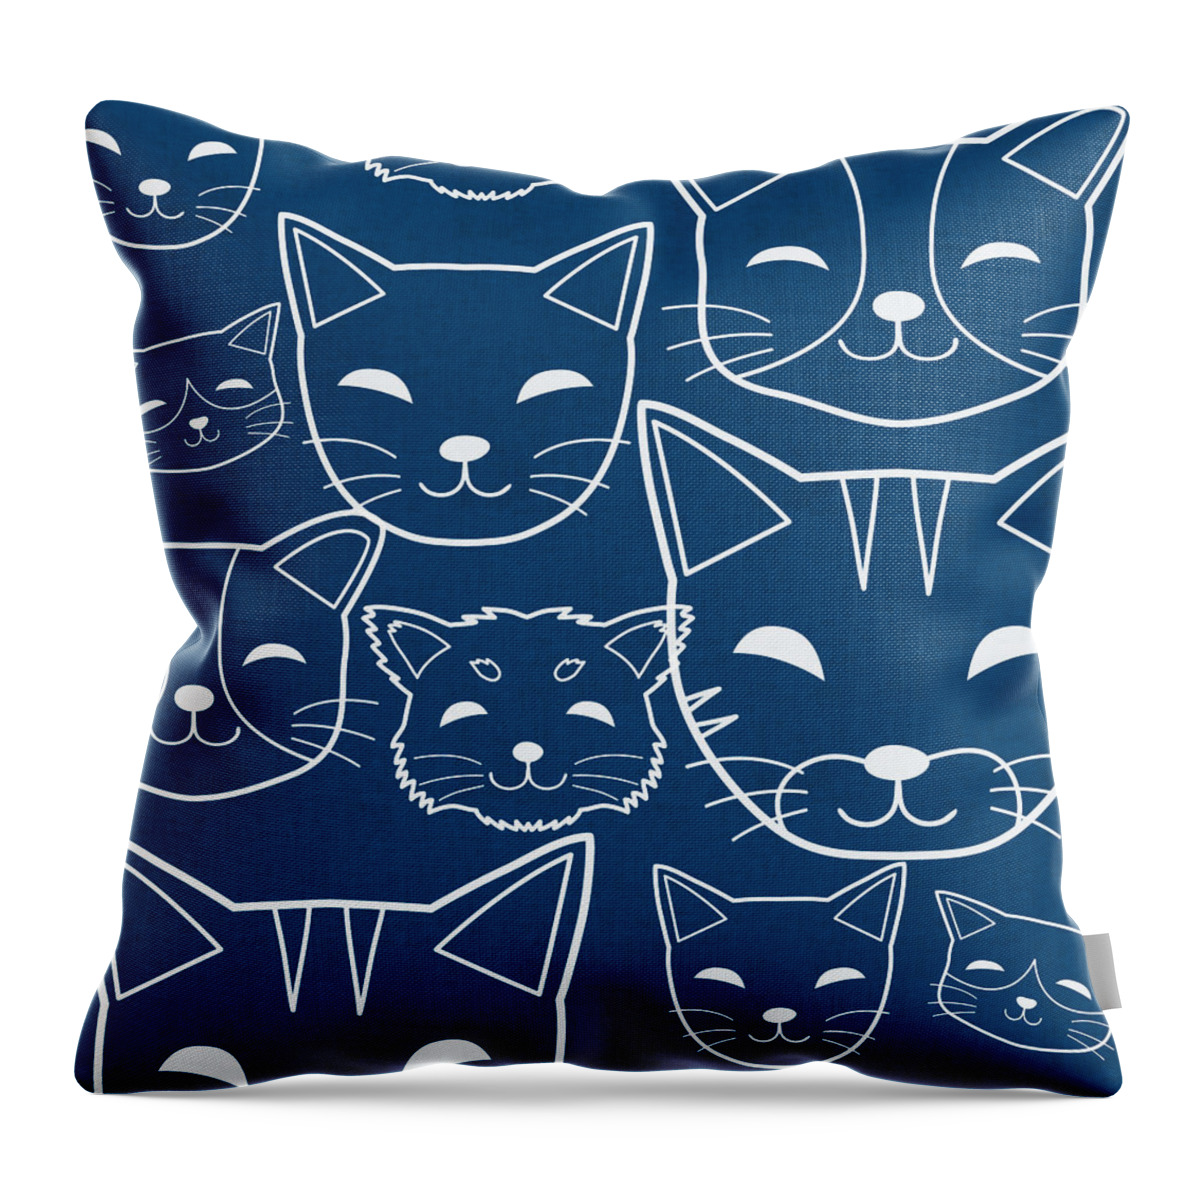 Cats Throw Pillow featuring the digital art Cats- Art by Linda Woods by Linda Woods